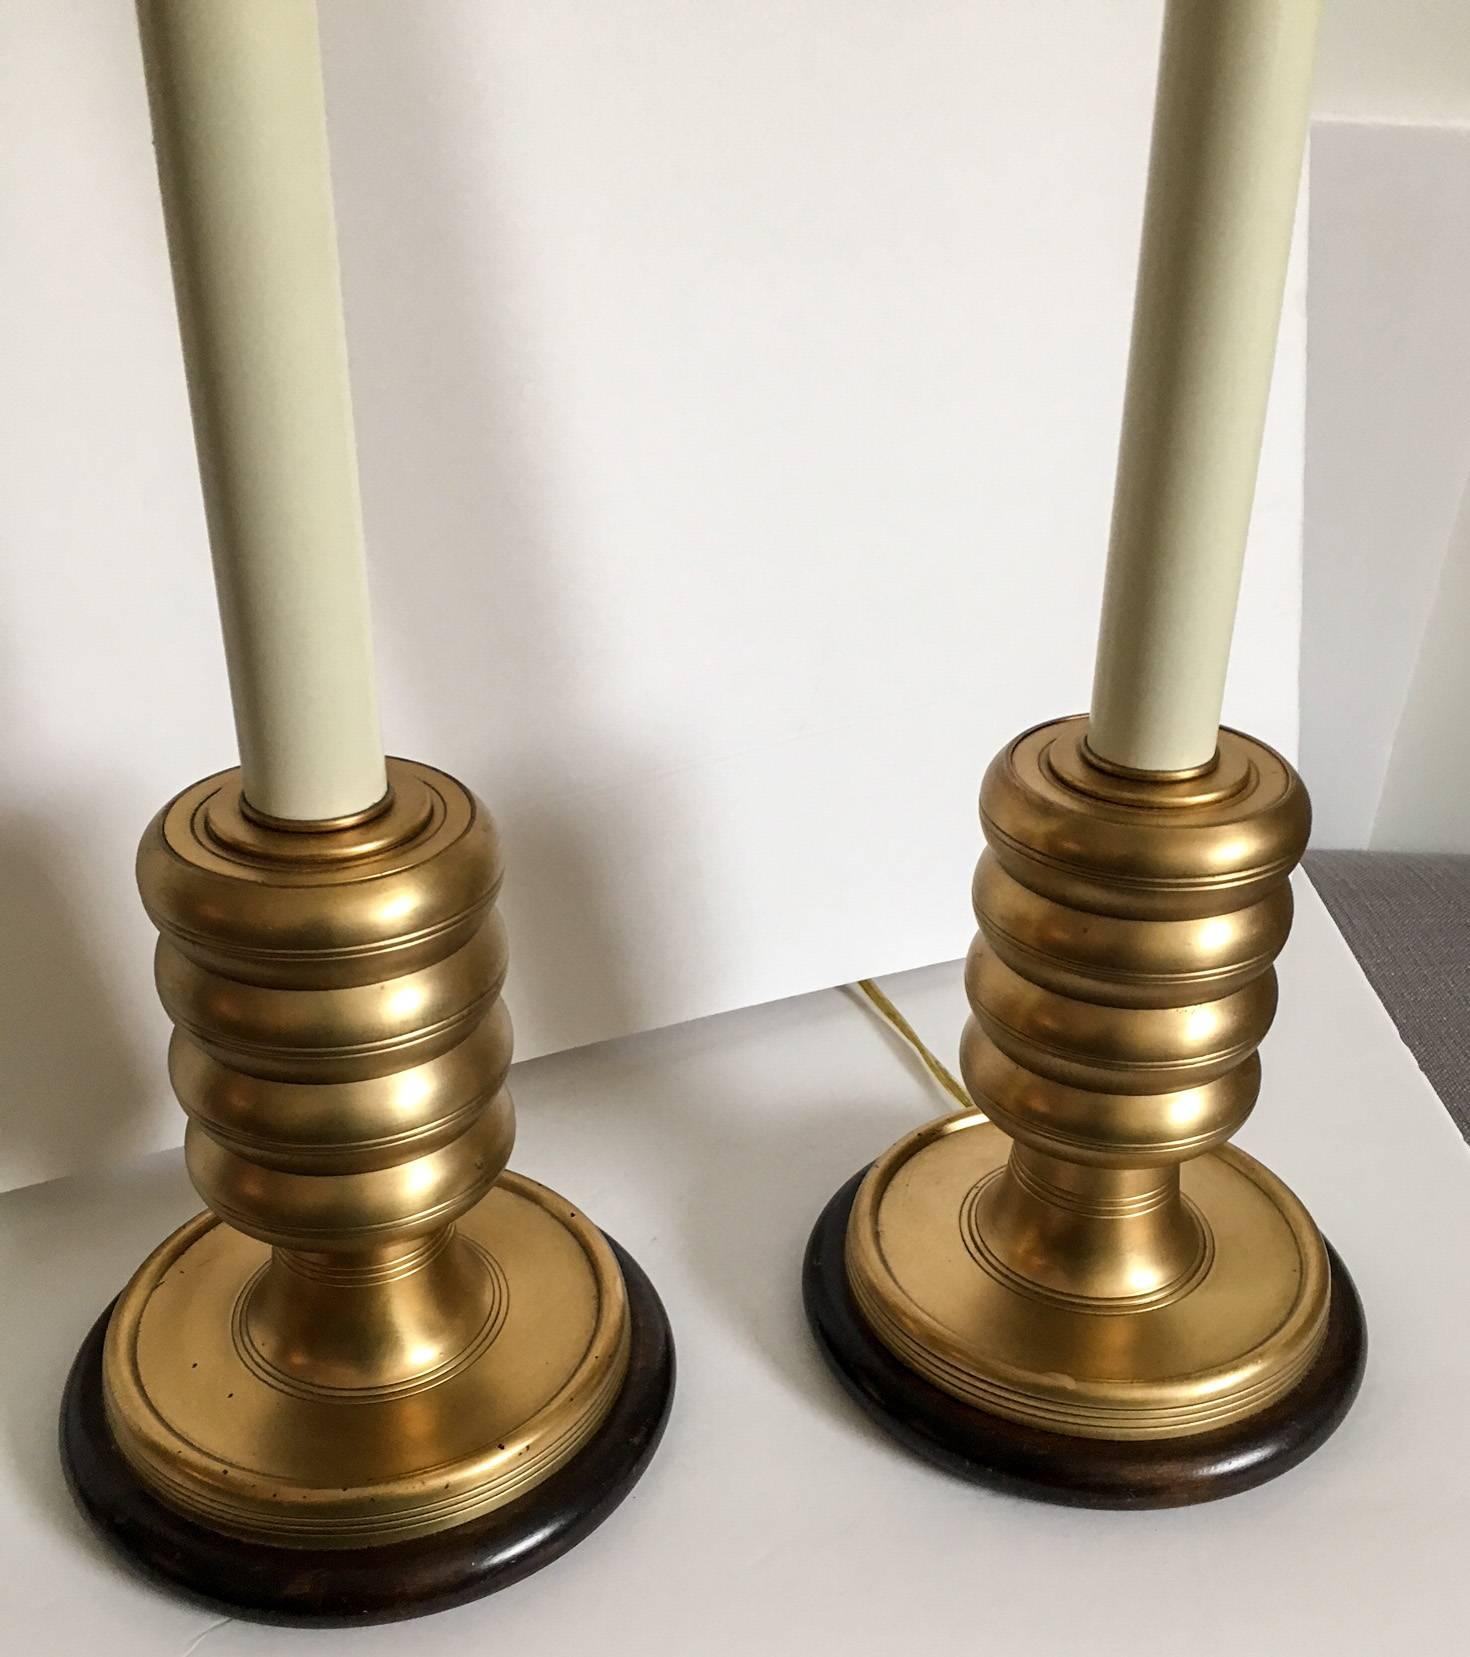 Offered is a pair of brass beehive style lamps on wooden round bases by Frederick Cooper. Body is cream plastic with a brass top sleeve. Original finials are included on the harps which were with the lamps when purchased. Marked with a Frederick